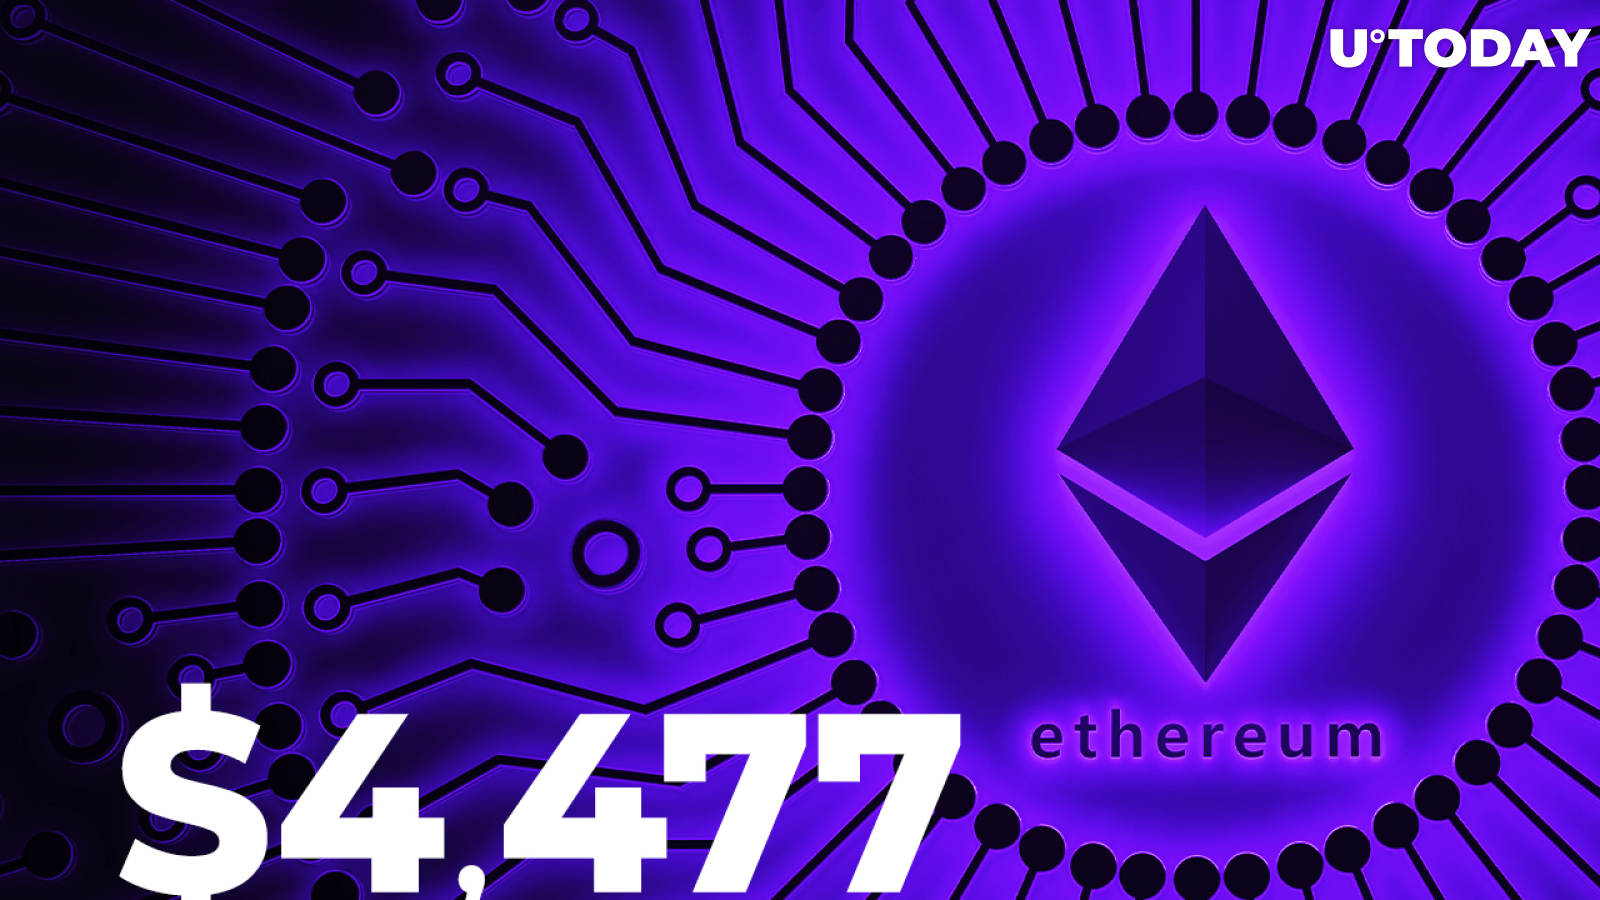 BREAKING: Ethereum Hits New All-Time High of $4,477 